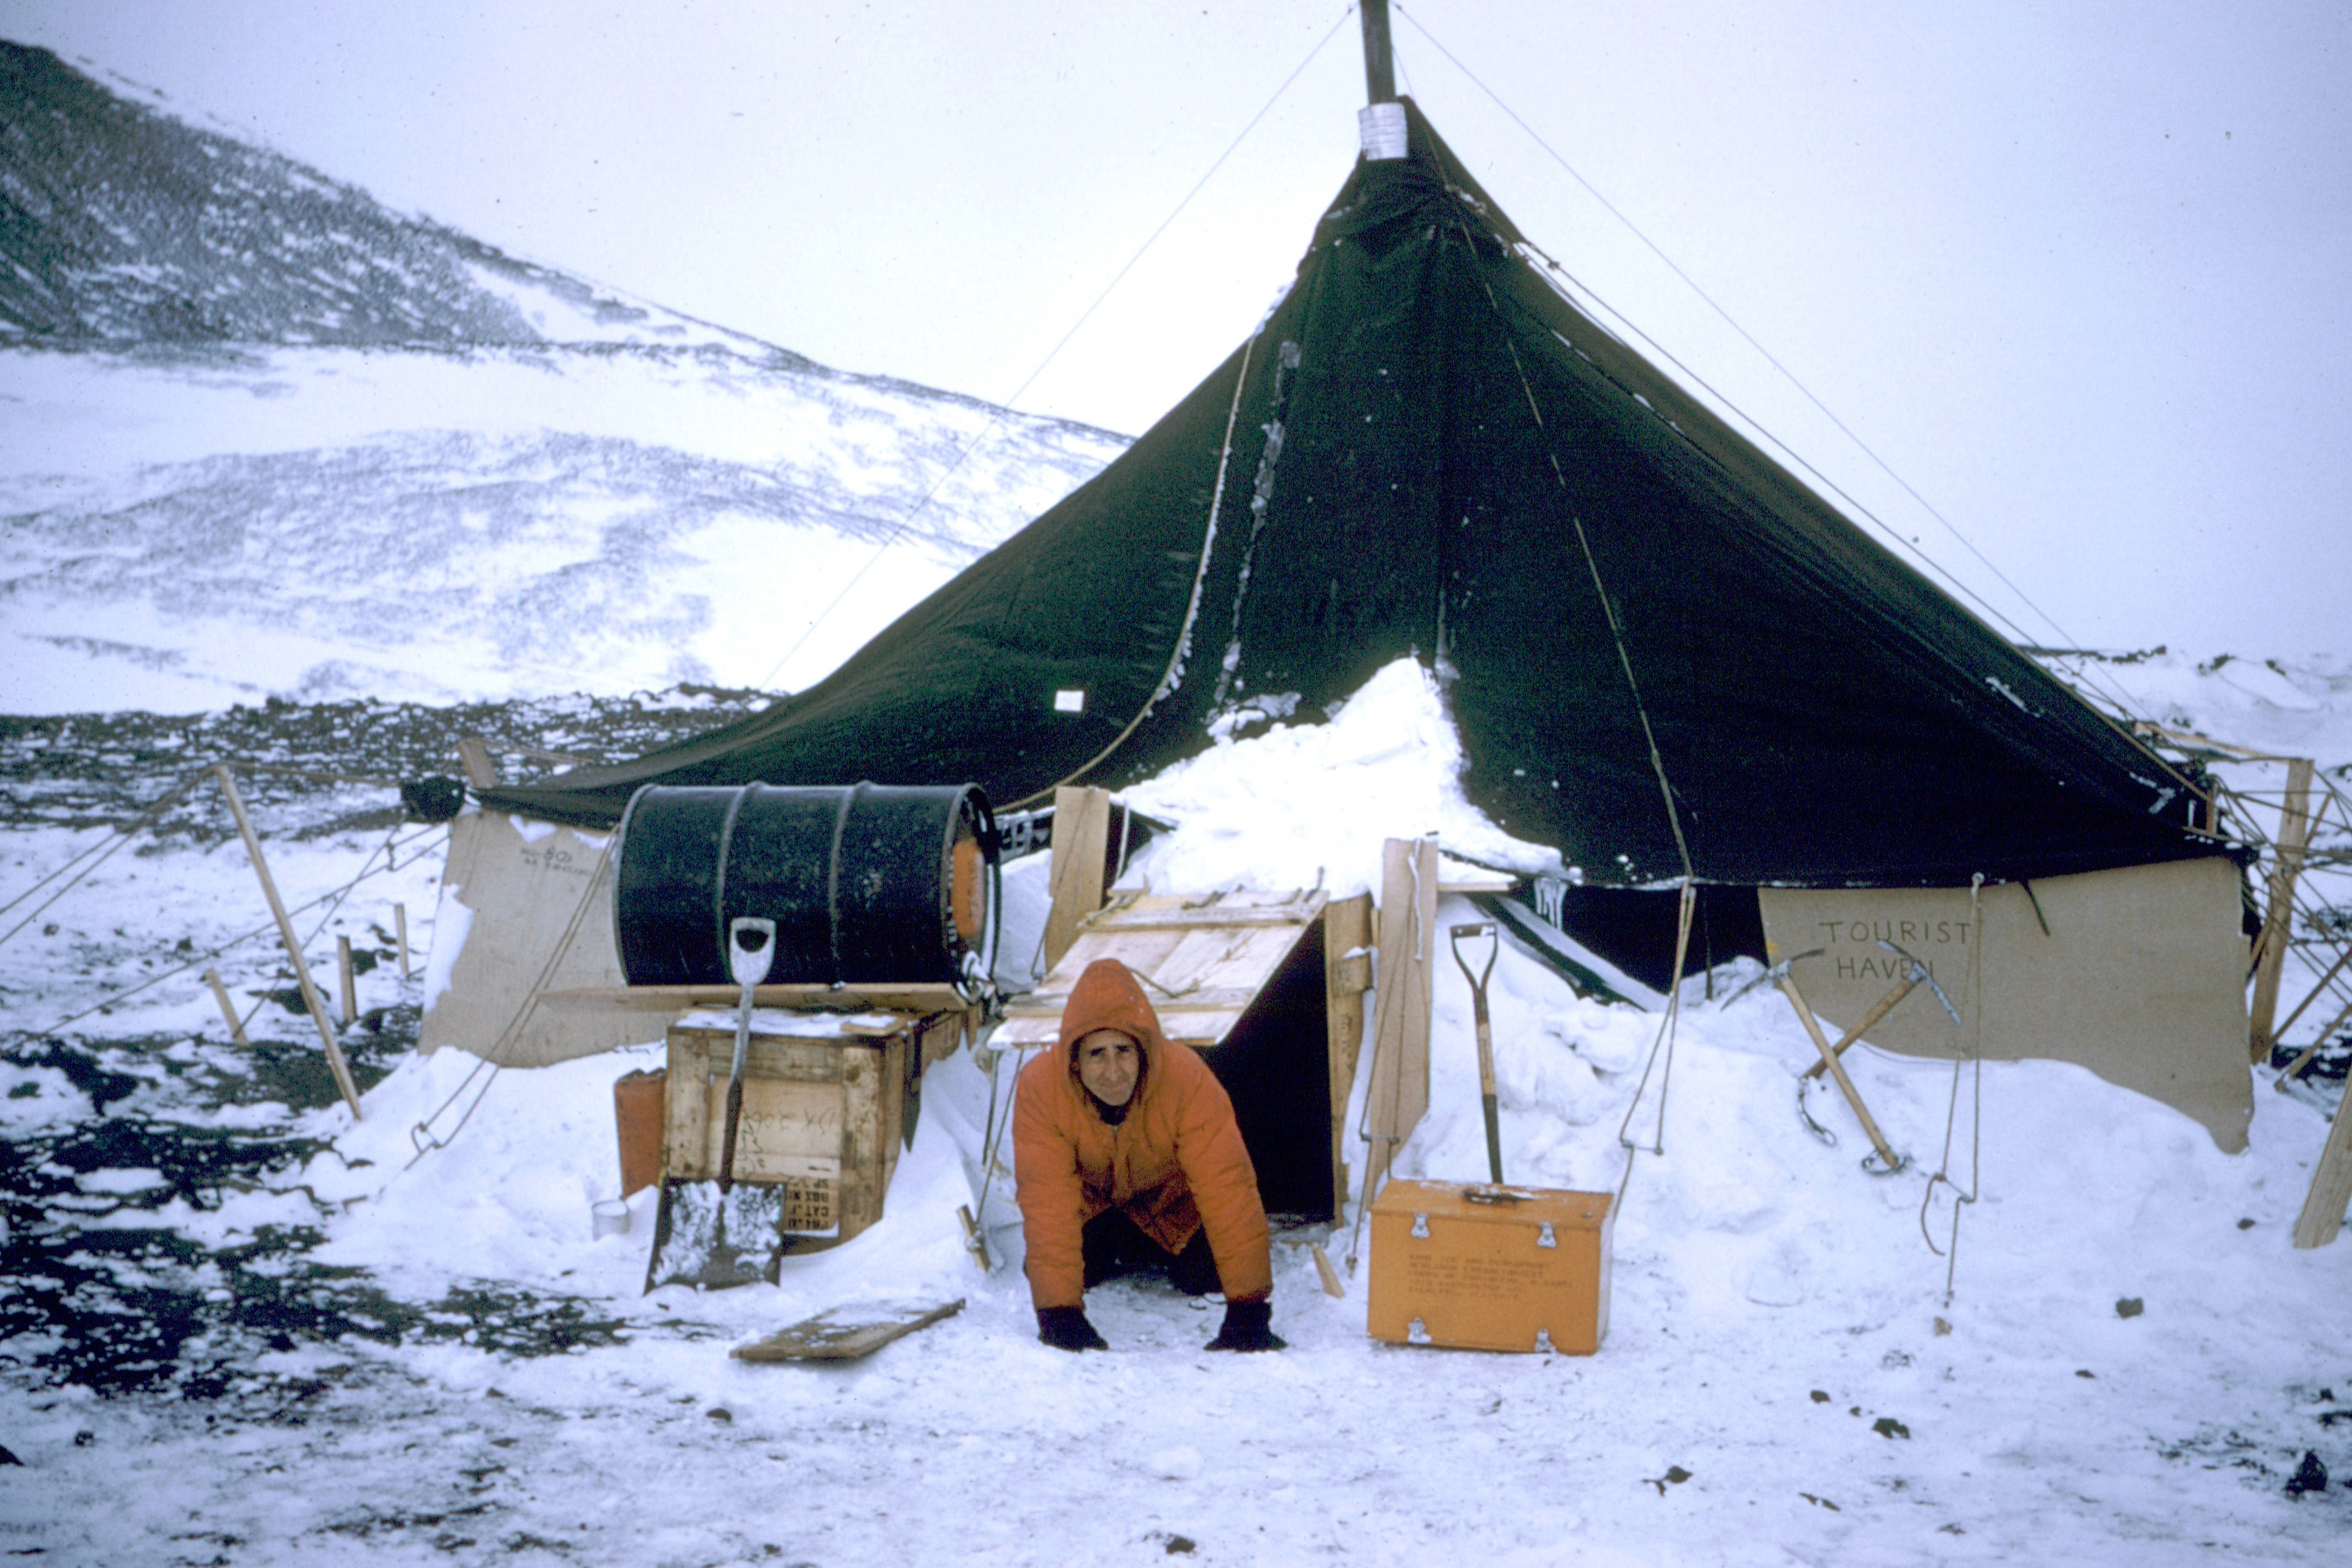 A man crawls out of a tent